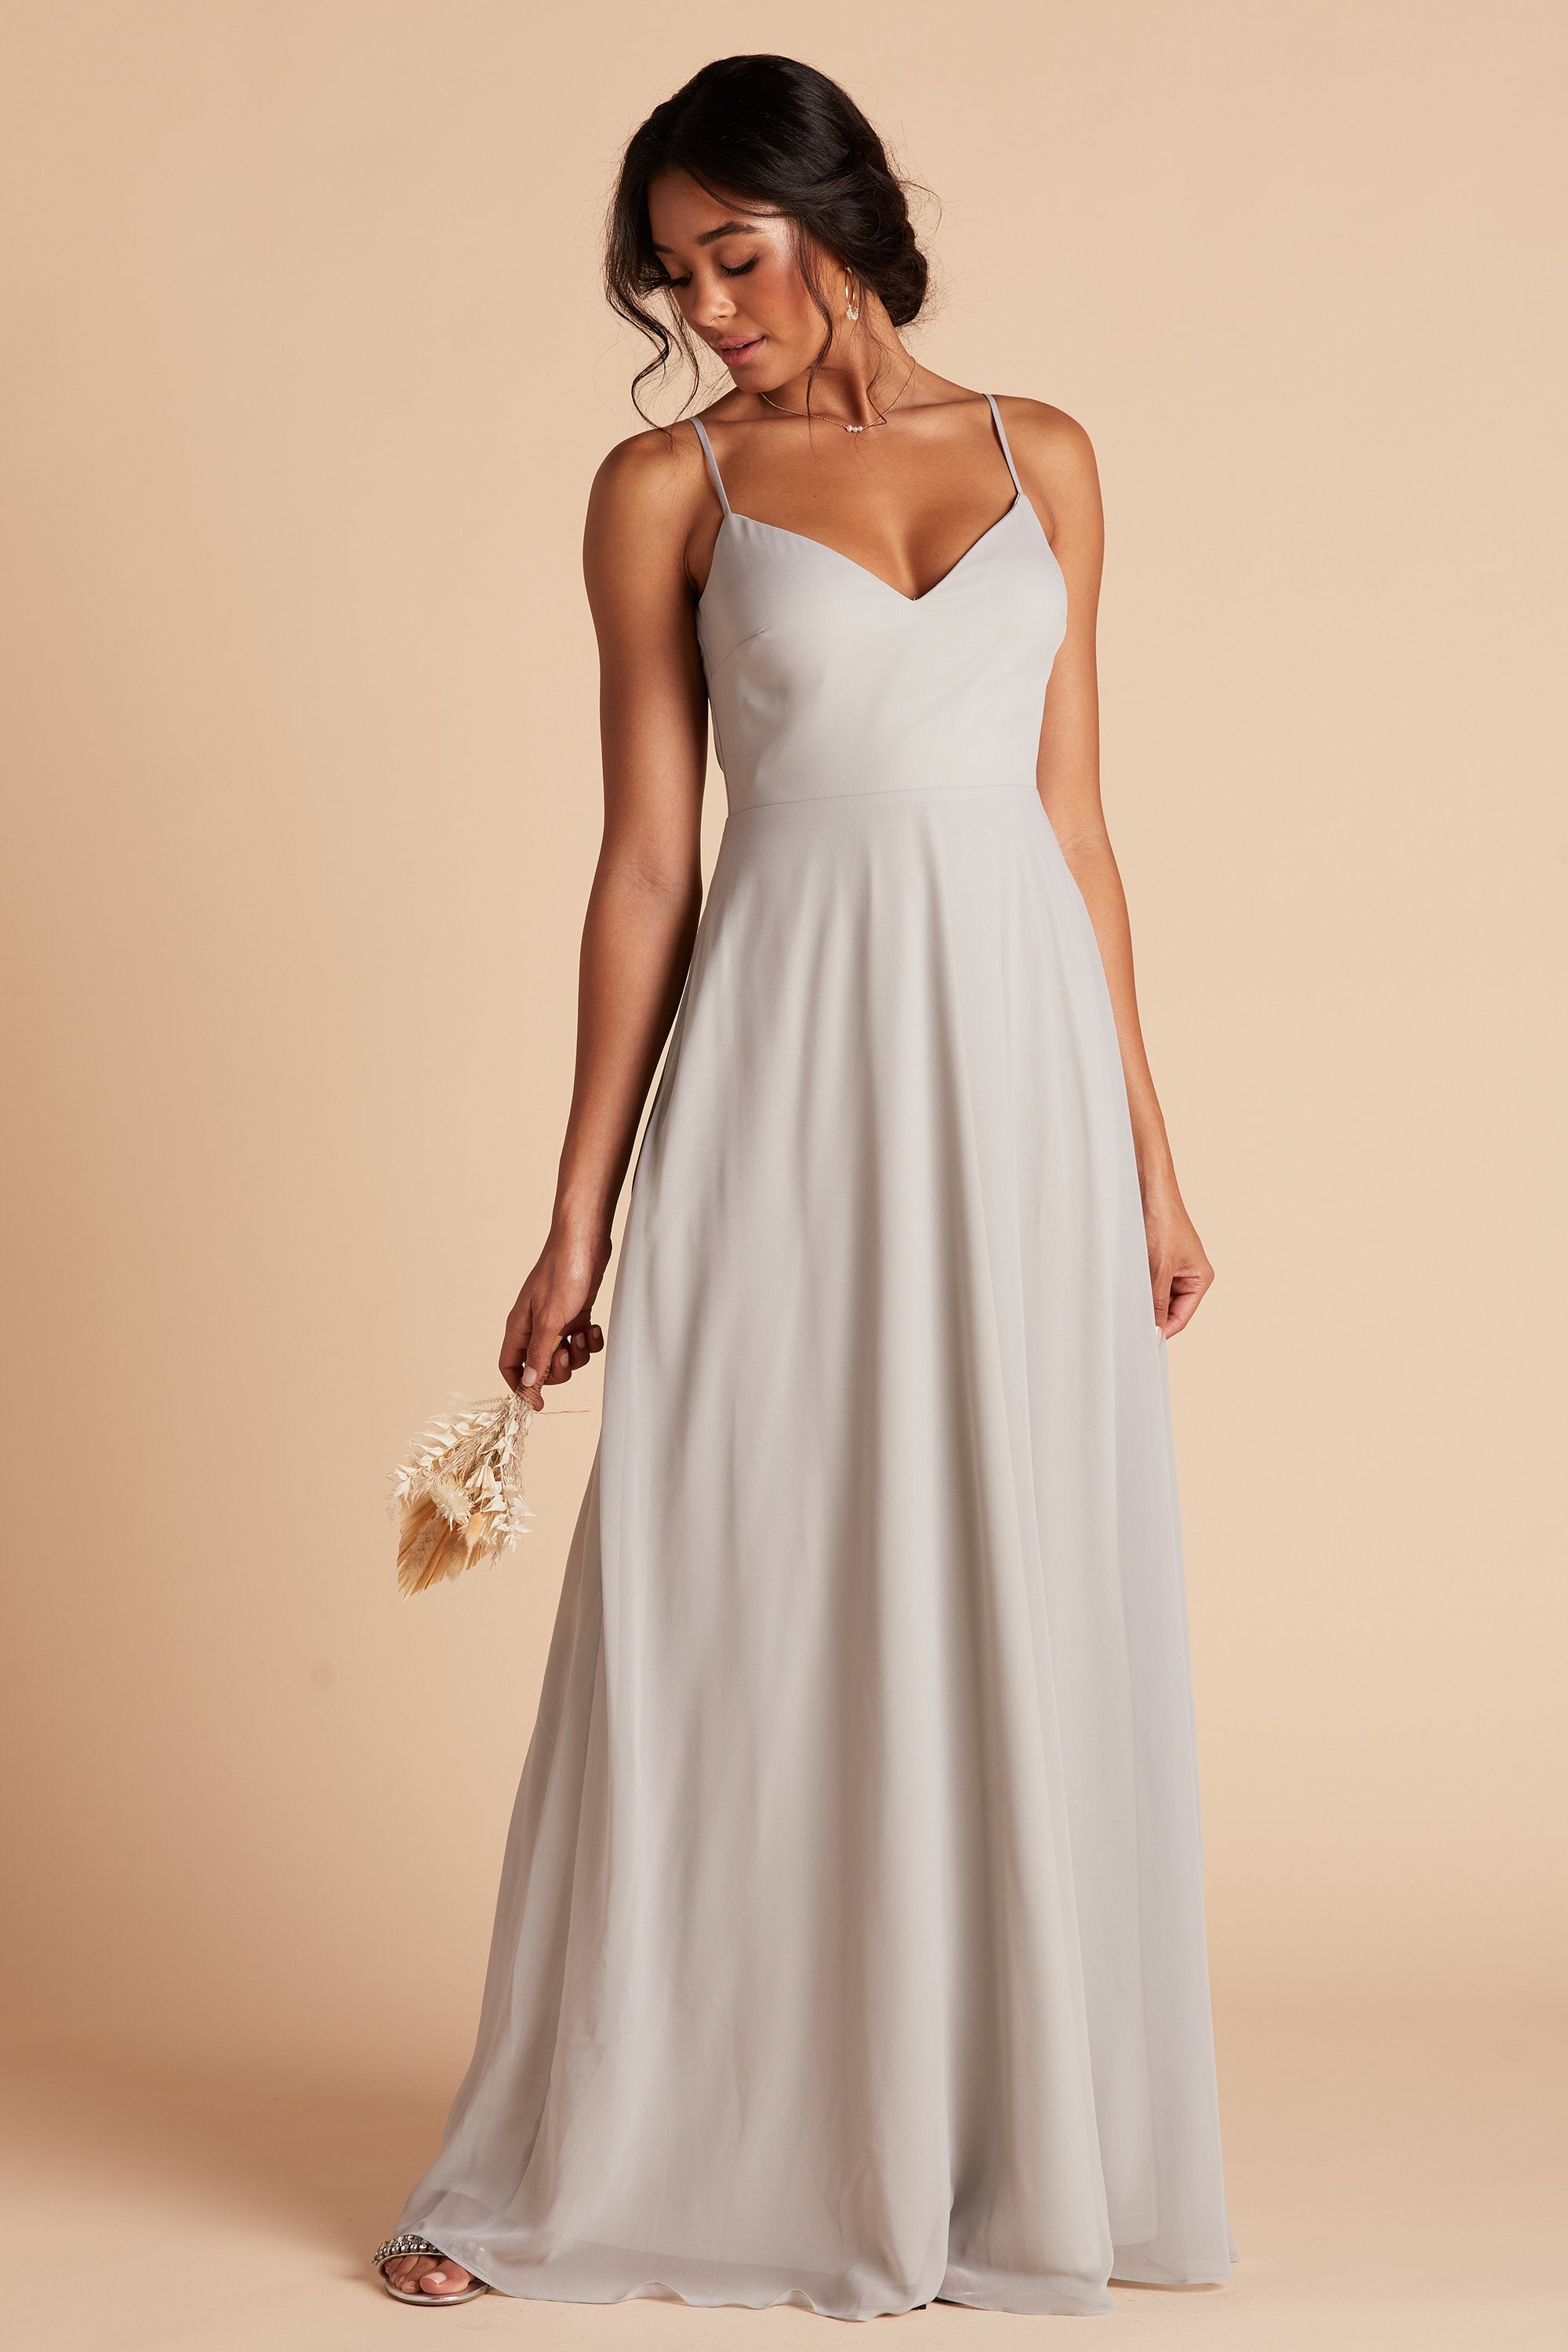 Devin convertible bridesmaid dress in dove gray chiffon by Birdy Grey, front view